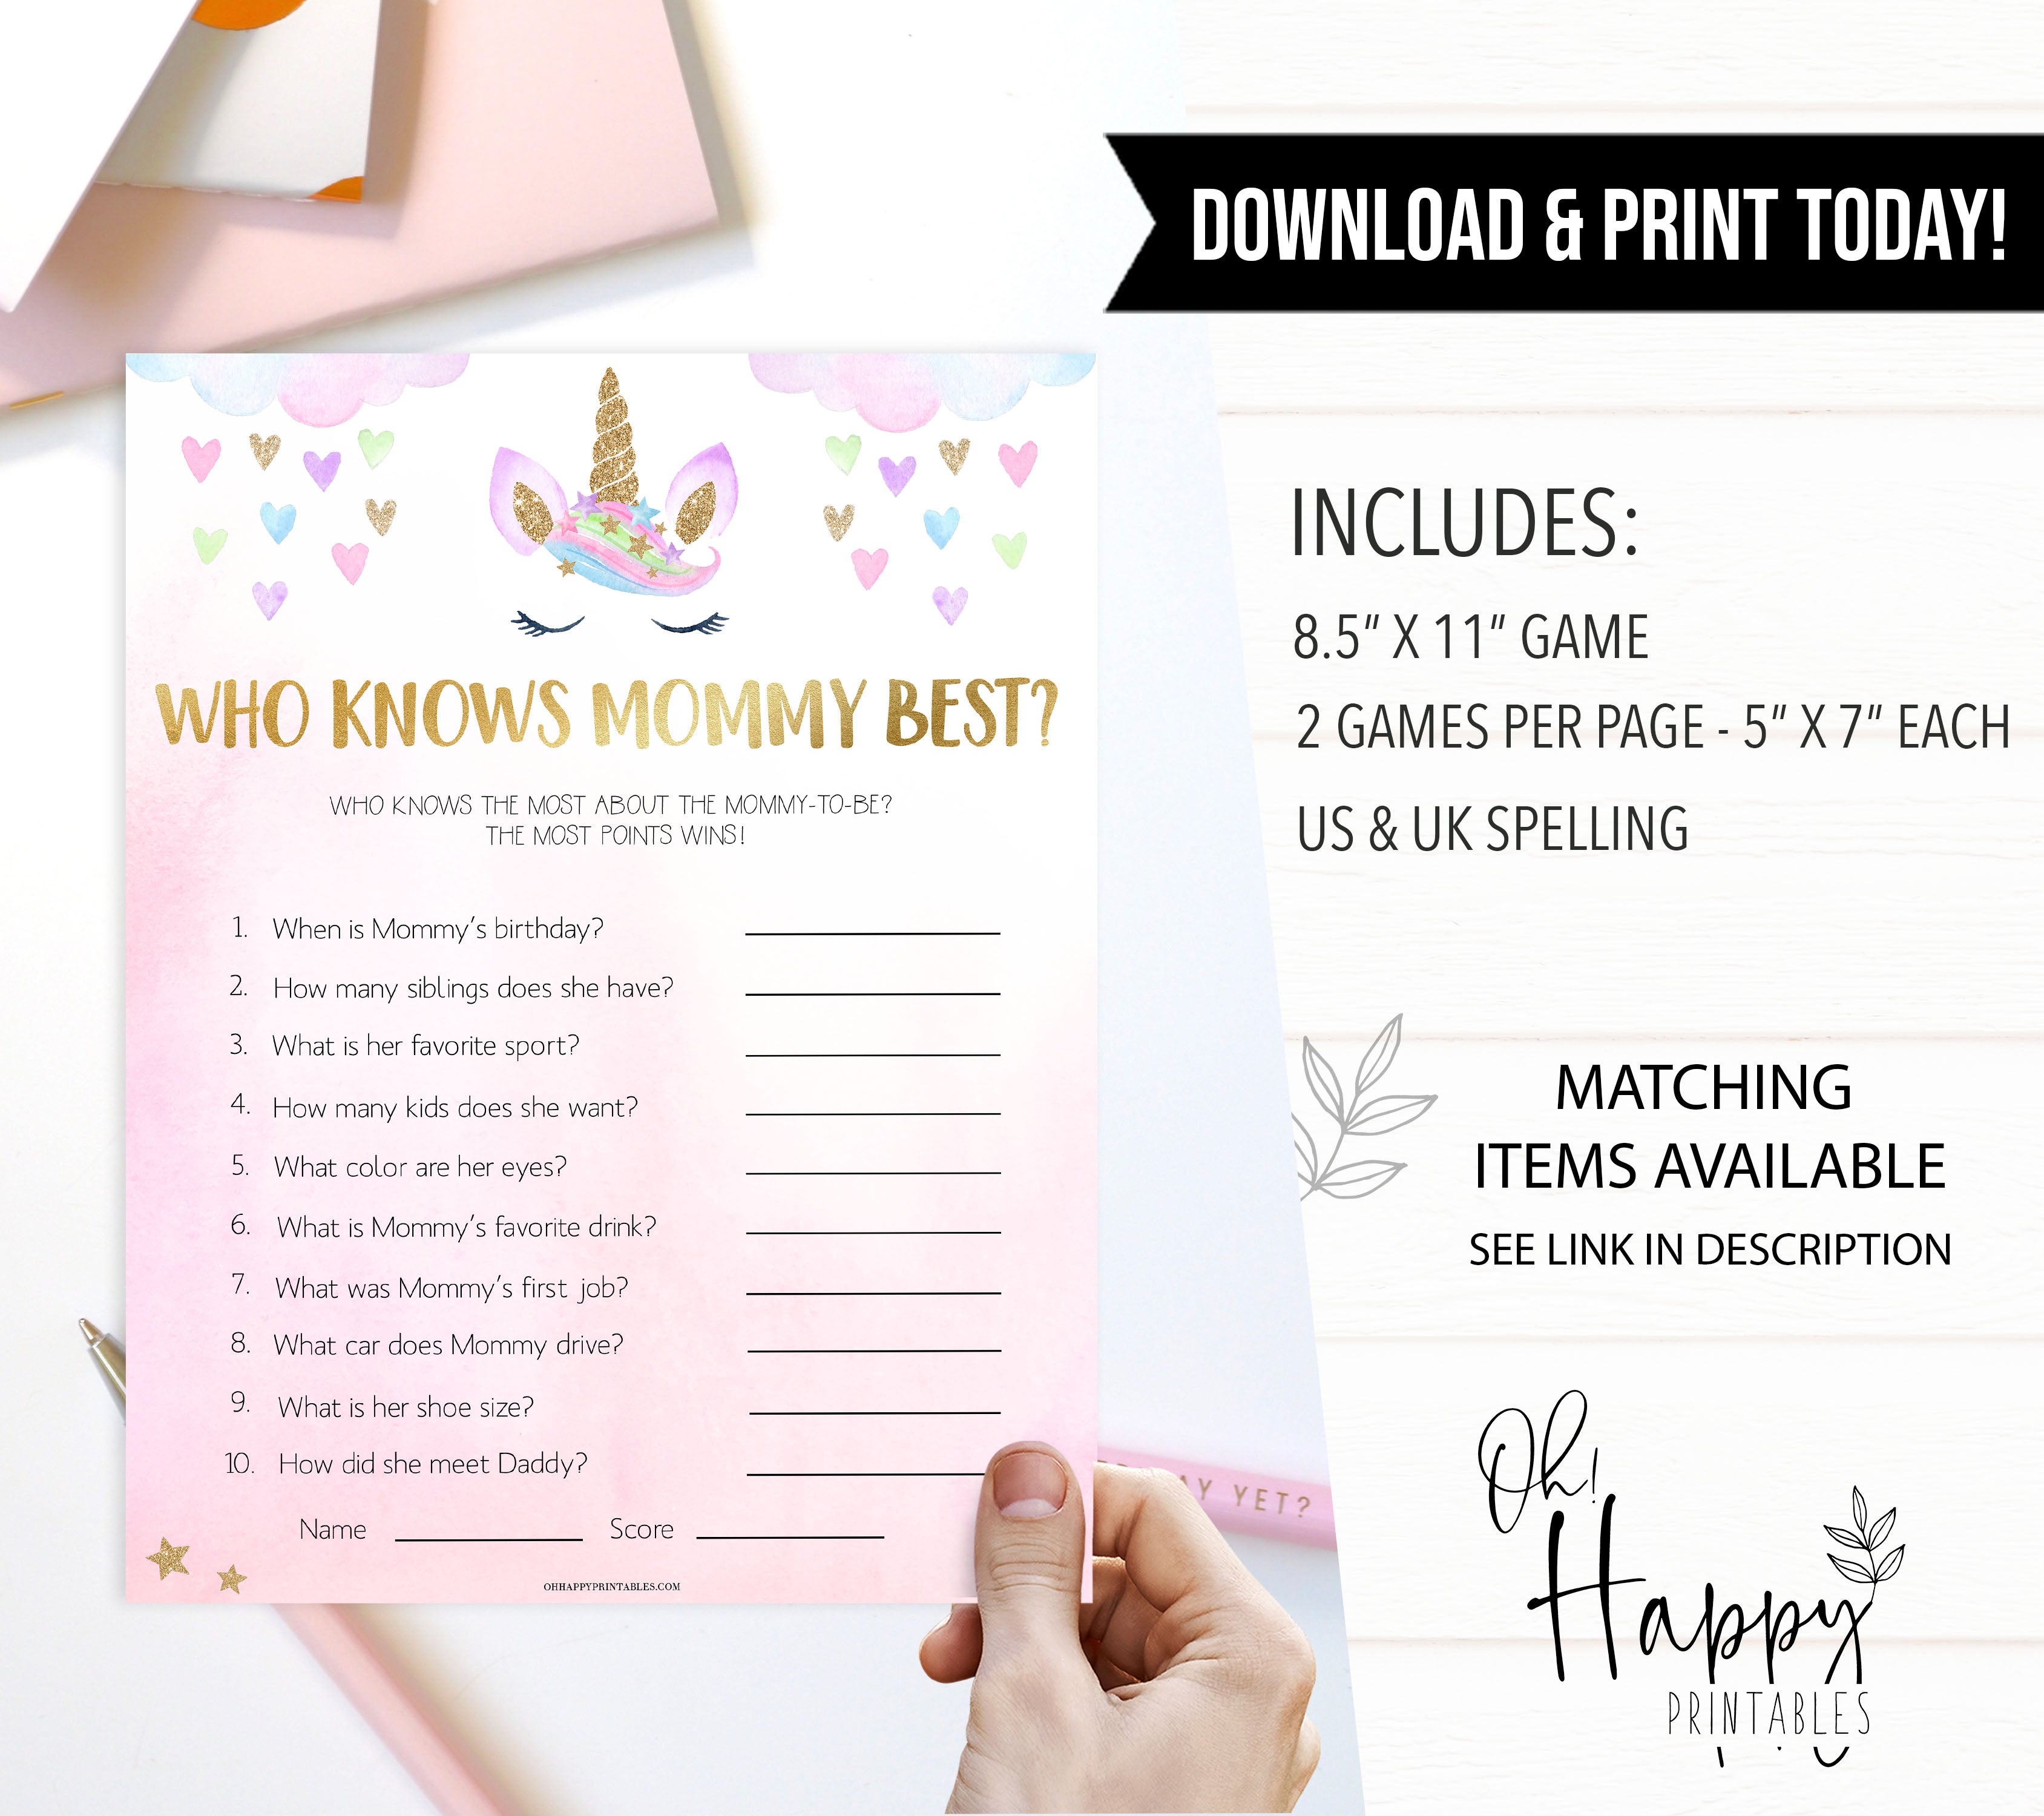 who knows mommy best baby game, Printable baby shower games, unicorn baby games, baby shower games, fun baby shower ideas, top baby shower ideas, unicorn baby shower, baby shower games, fun unicorn baby shower ideas